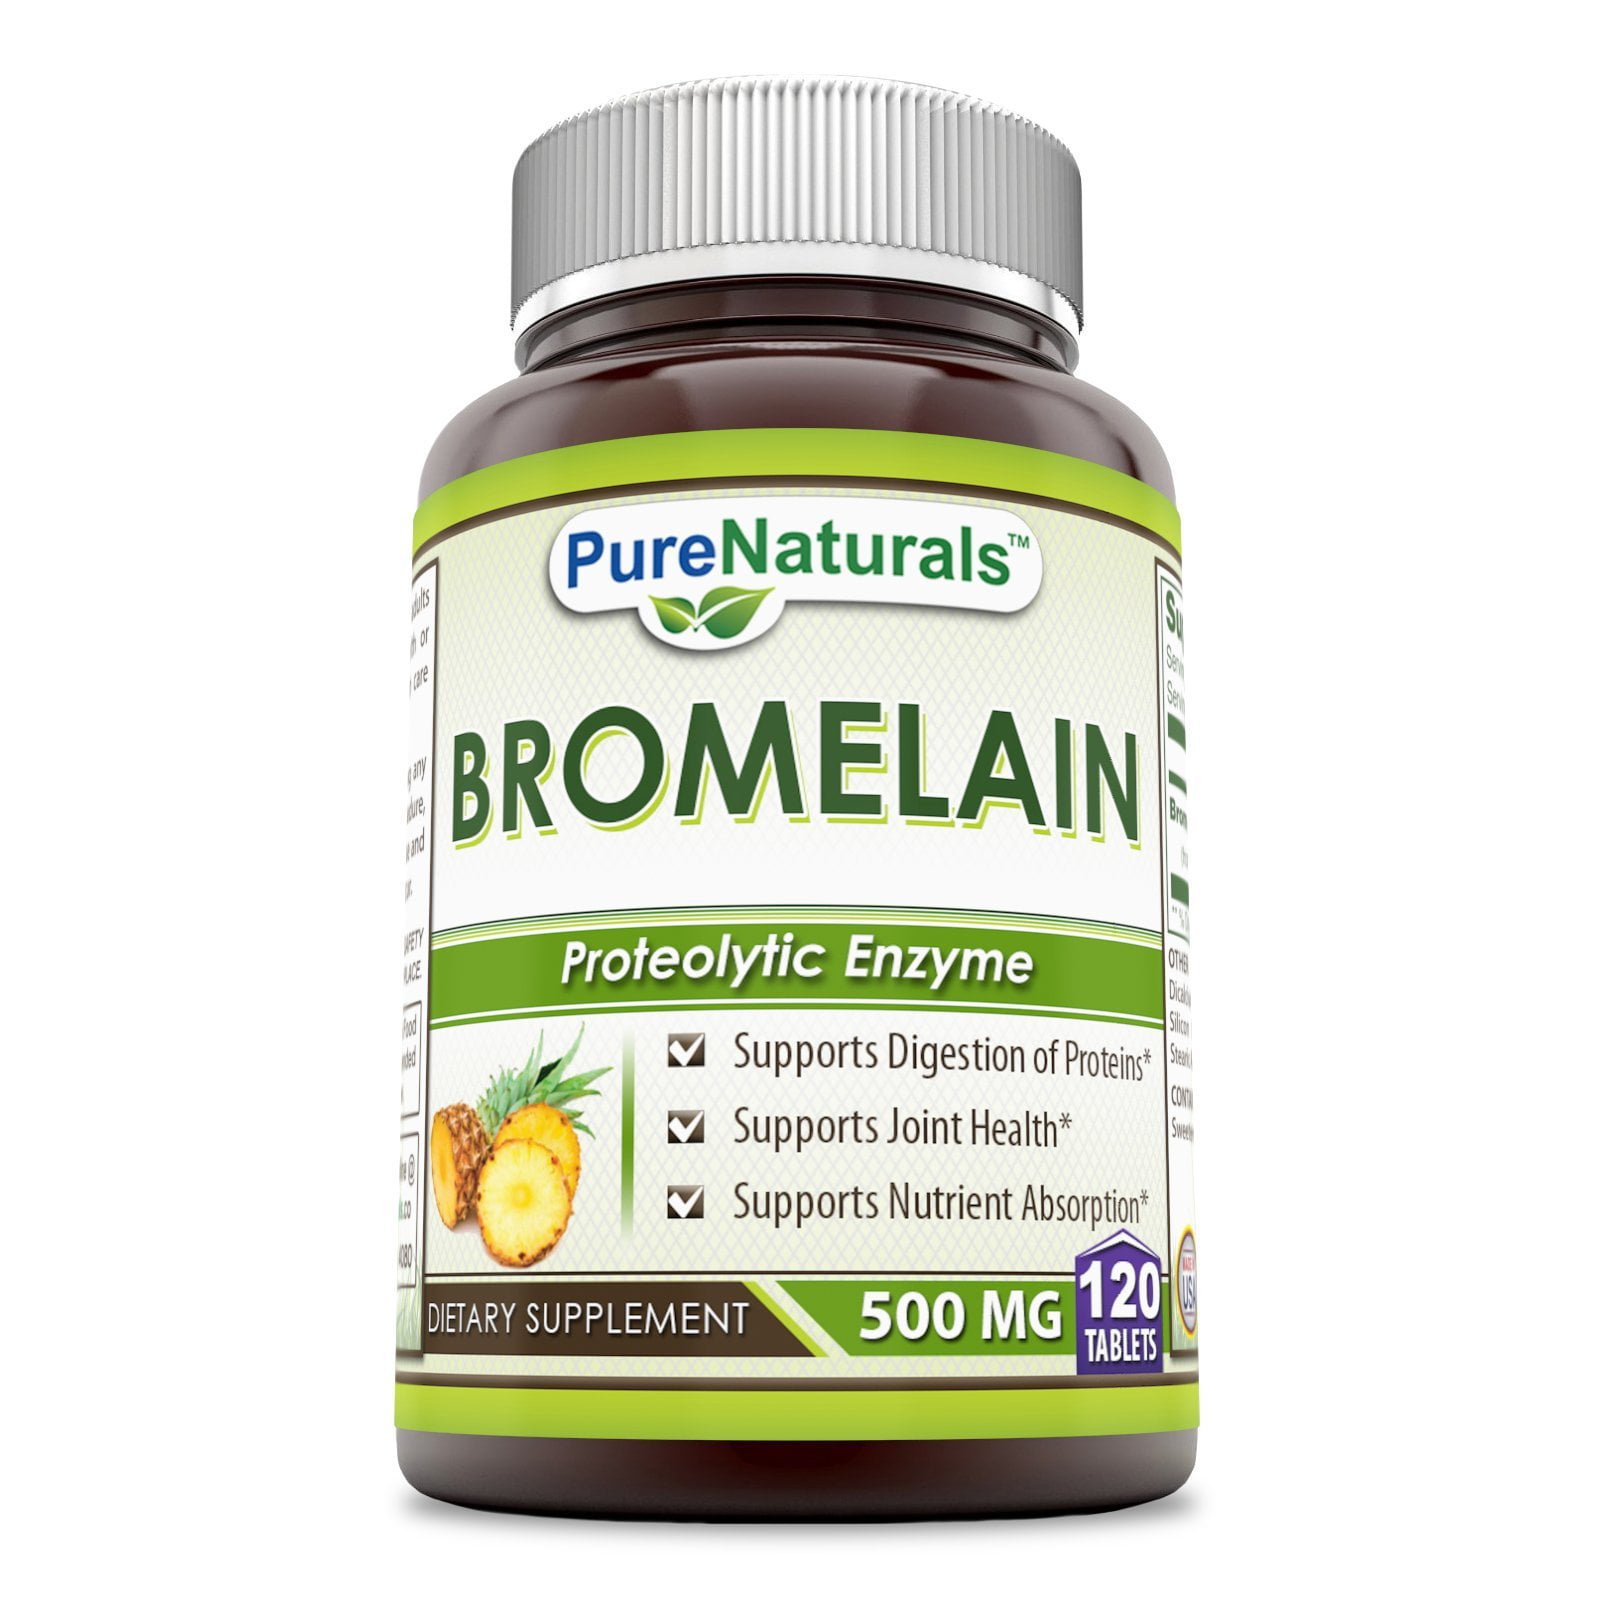 Pure Naturals Bromelain Dietary Supplement - 500mg, 120 Enzyme Tablets ...